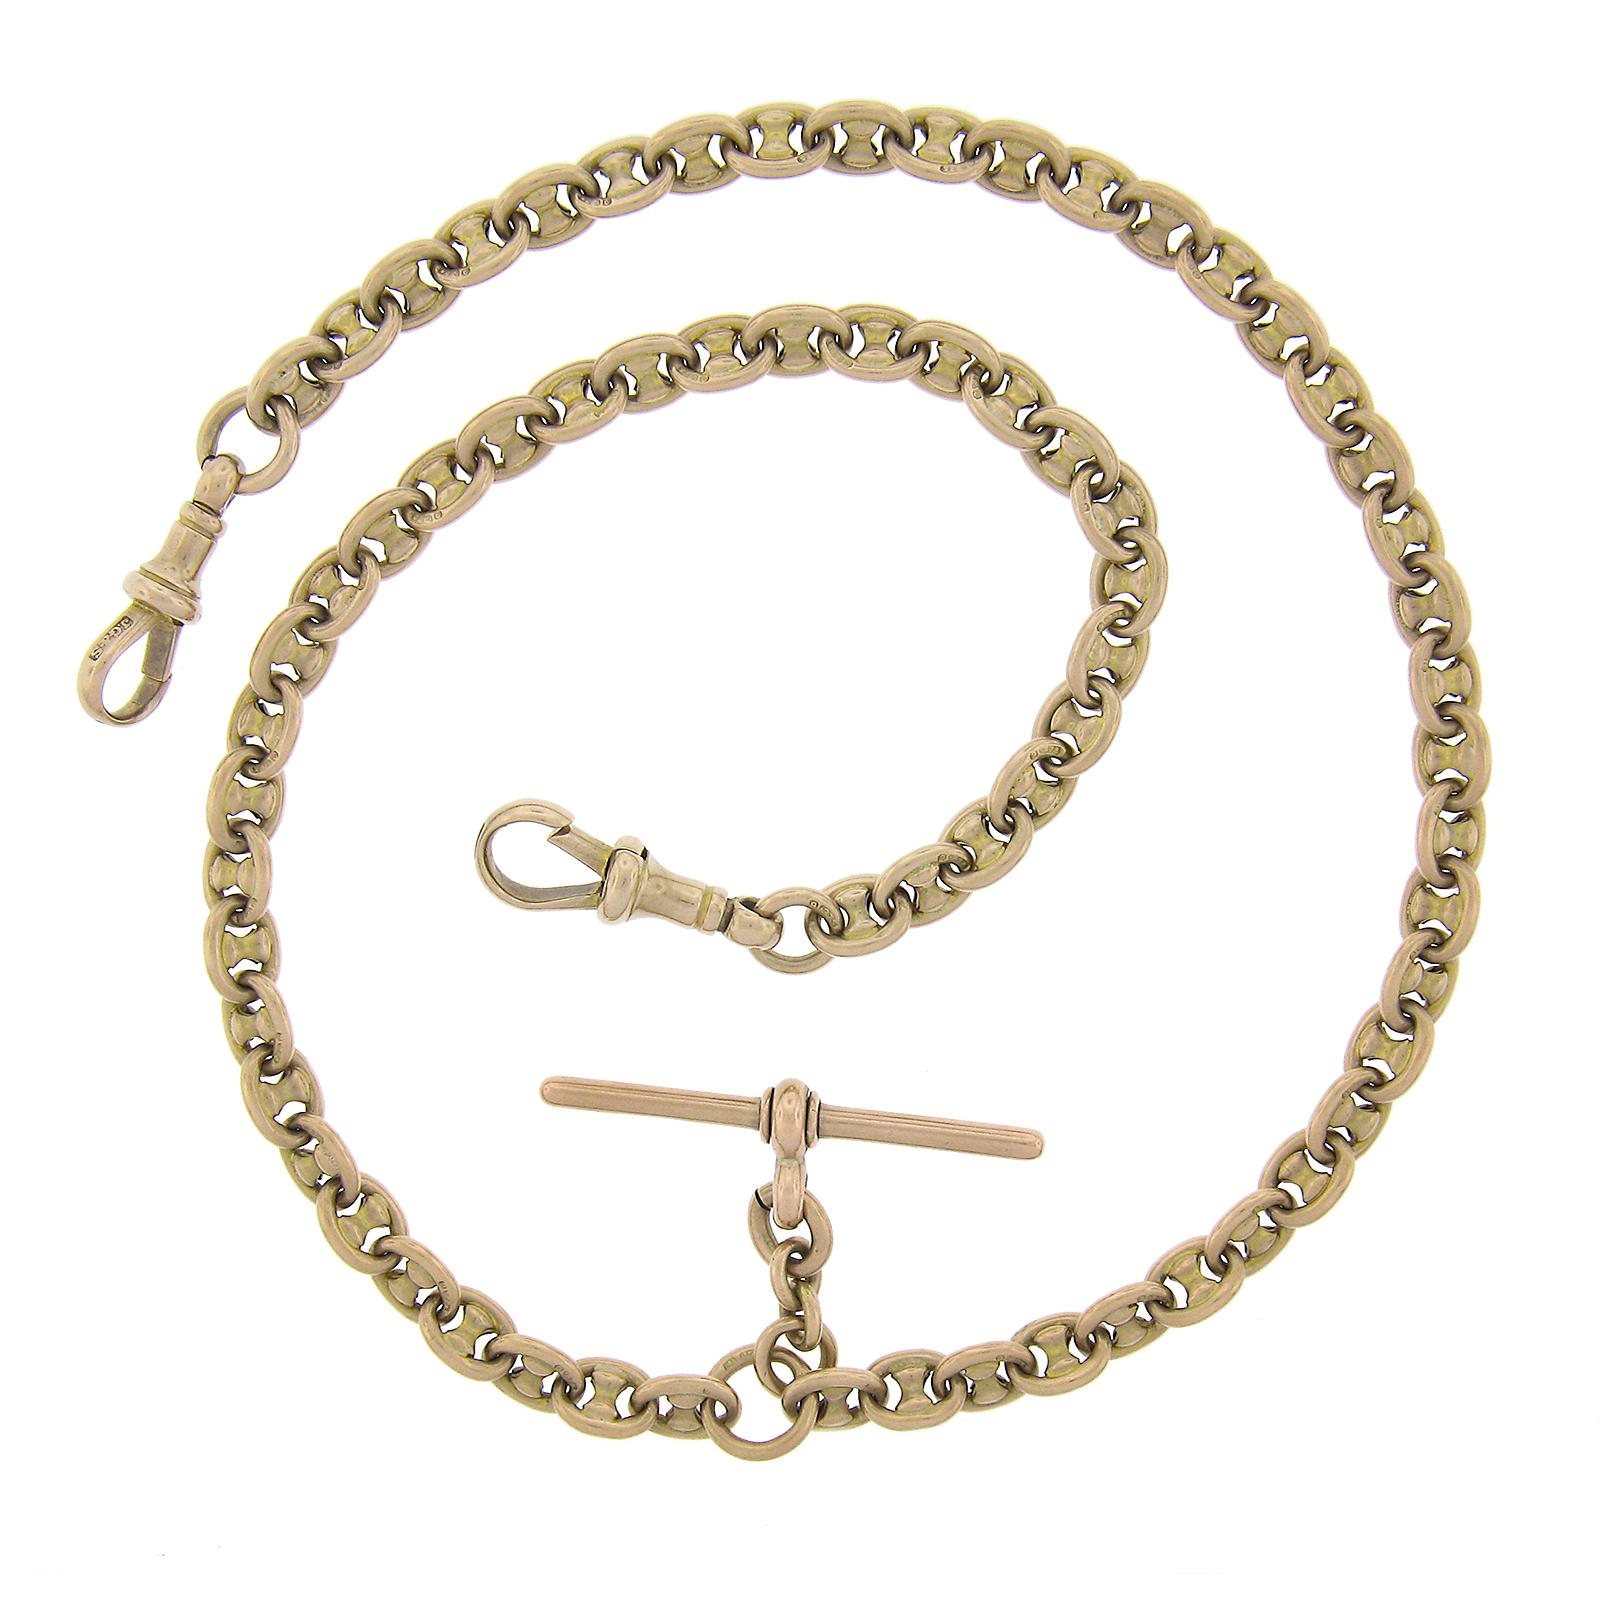 Material: Solid 9c Rosy Yellow Gold
Weight: 32.17 Grams
Chain Type: Unique Mariner Like Link
Chain Length:	16.5 Inches
Chain Width: 5.9mm 
Chain Thickness: 5.9mm 
Clasp: 2 Dog Clips (6.7x5.1mm Inside Diameter), Toggle Bar (34.8mm in length)
Stamp: